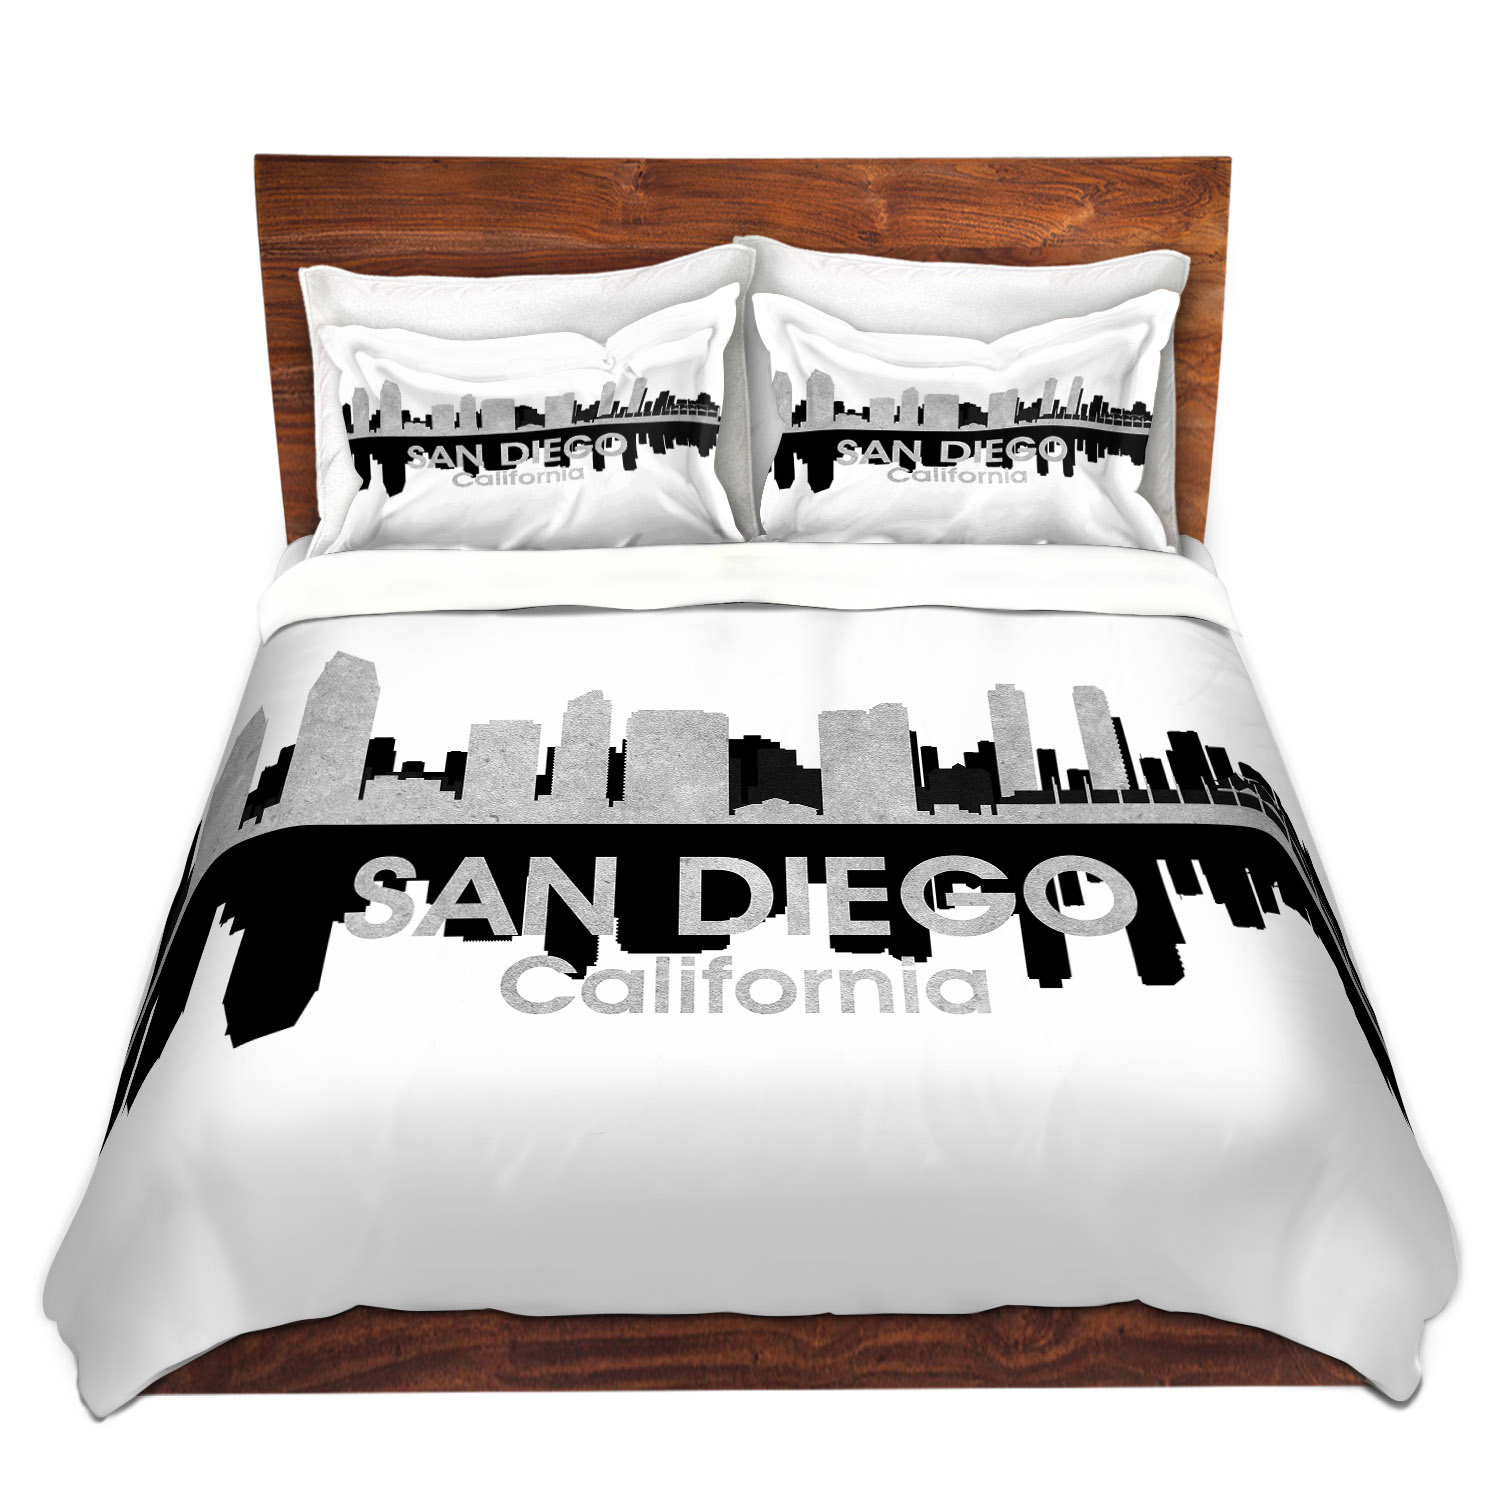 Dianoche Microfiber Duvet Covers By Angelina Vick - City Iv San Diego California